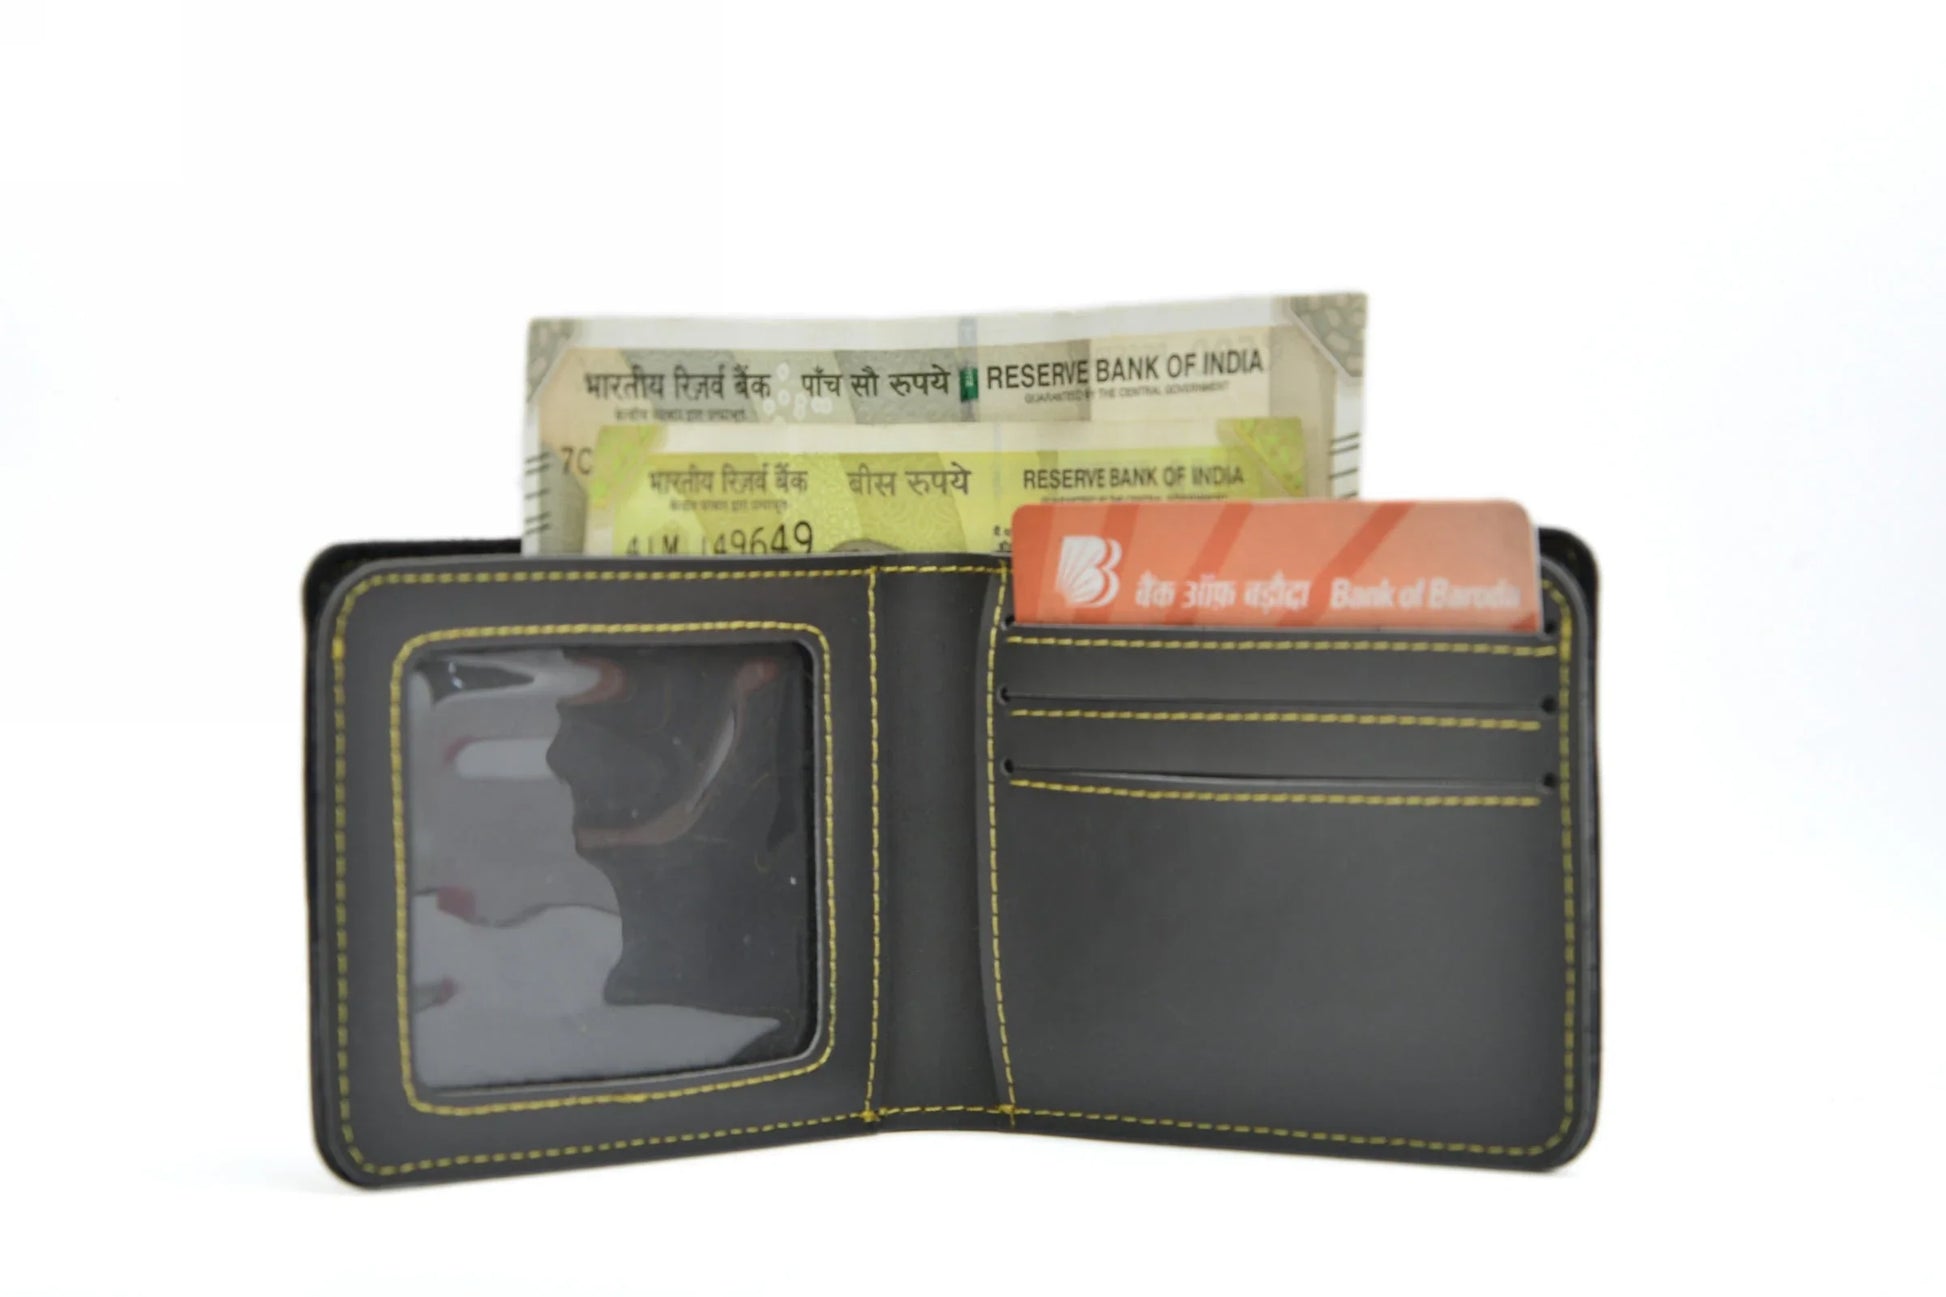 personalized-mens-wallet-grey-customized-best-gift-for-boyfriend-girlfriend.Personalized Men's Wallet - Grey. Lavish wallet made with the supreme quality synthetic leather is the perfect touch to any office/formal attire. The option to personalize it with your name and lucky charm makes it that much more special and close to heart. This is the best corporate gift! Always be trending and in fashion with our customized wallets. The Mens Wallet material is vegan/synthetic/faux/PU leather